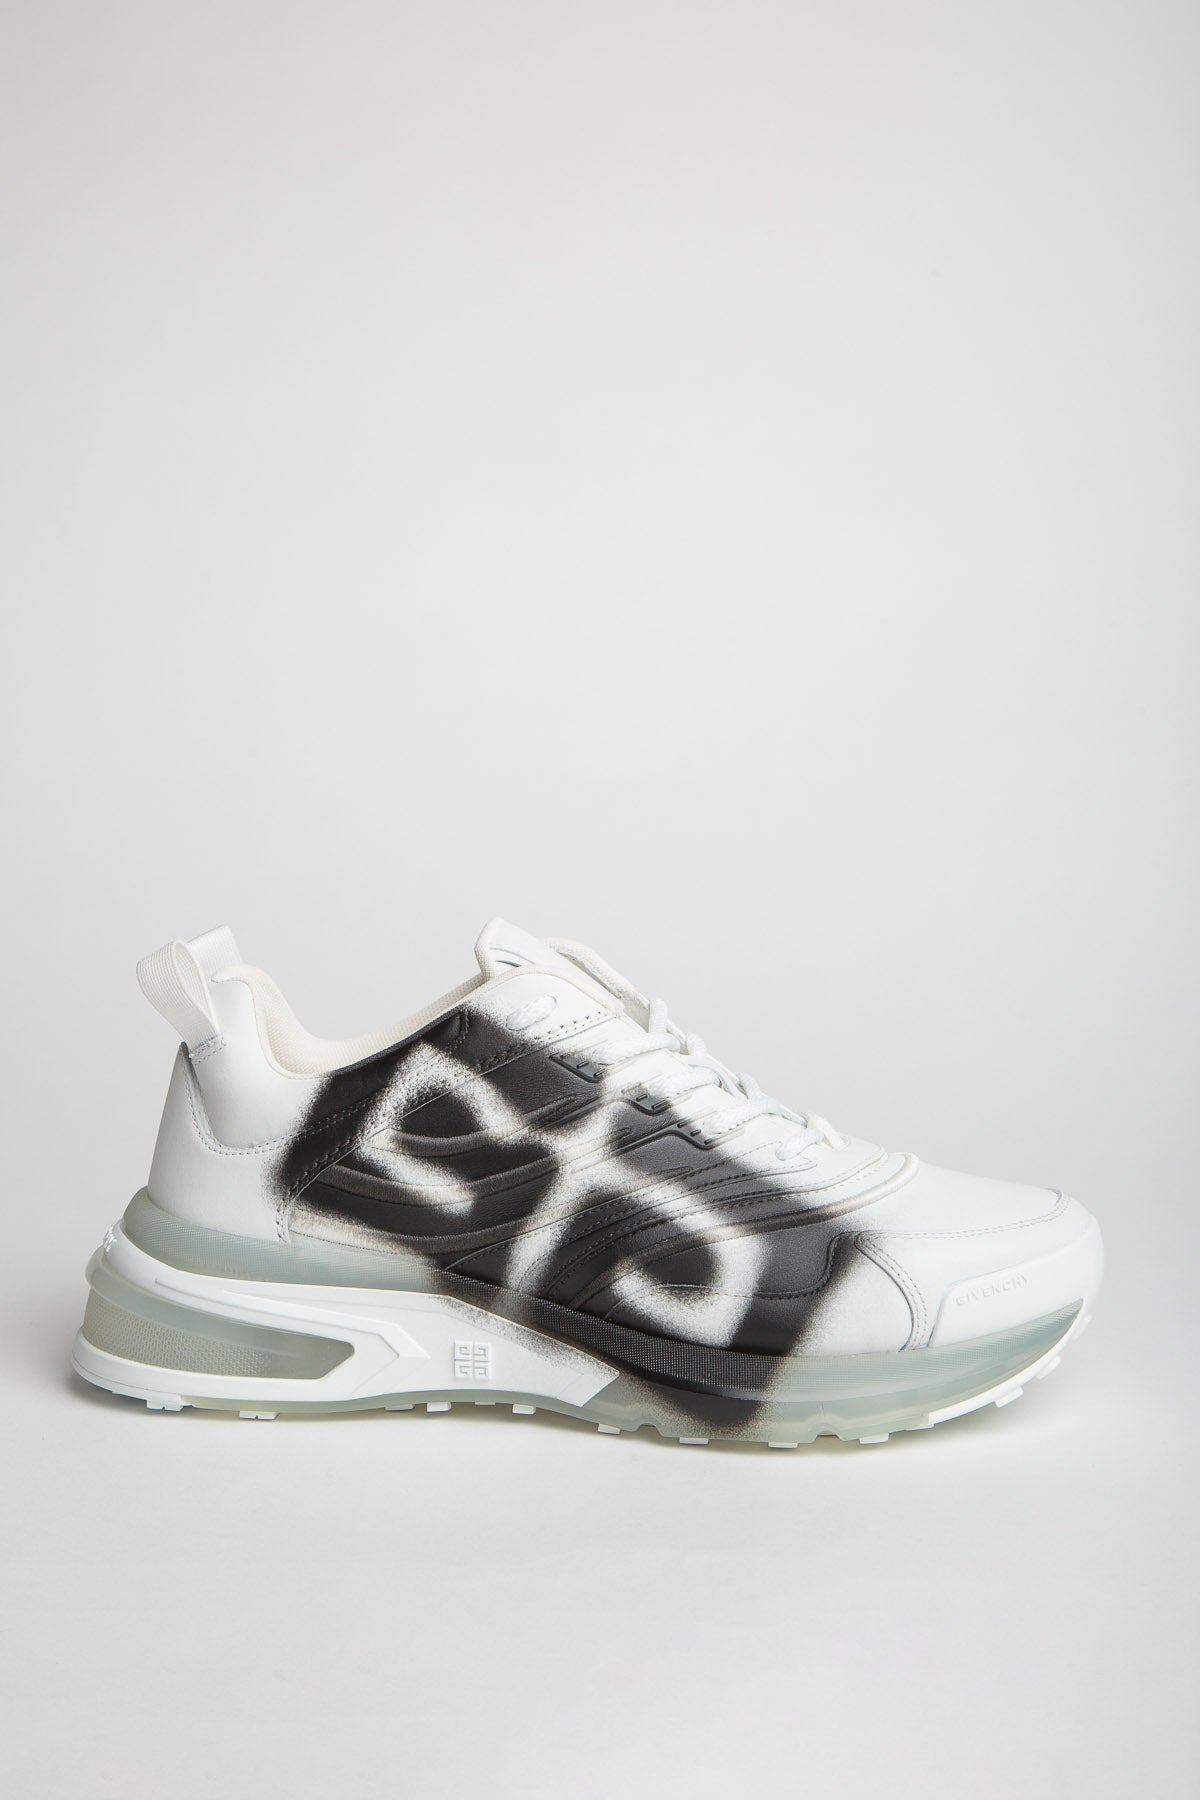 GIVENCHY | CHITO COLLAB GIV 1 RUNNERS